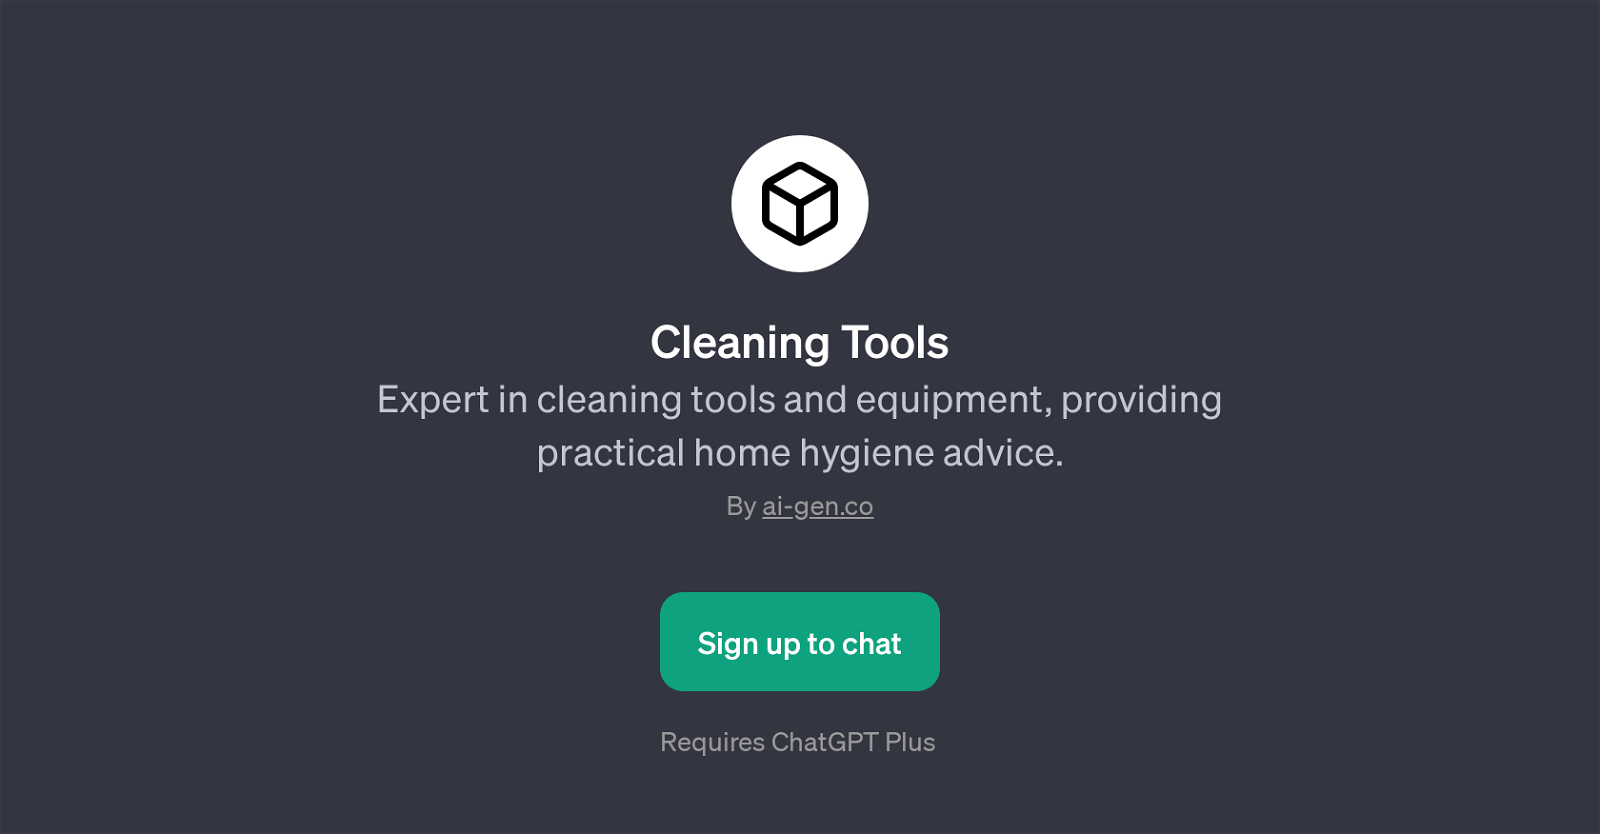 Cleaning Tools website